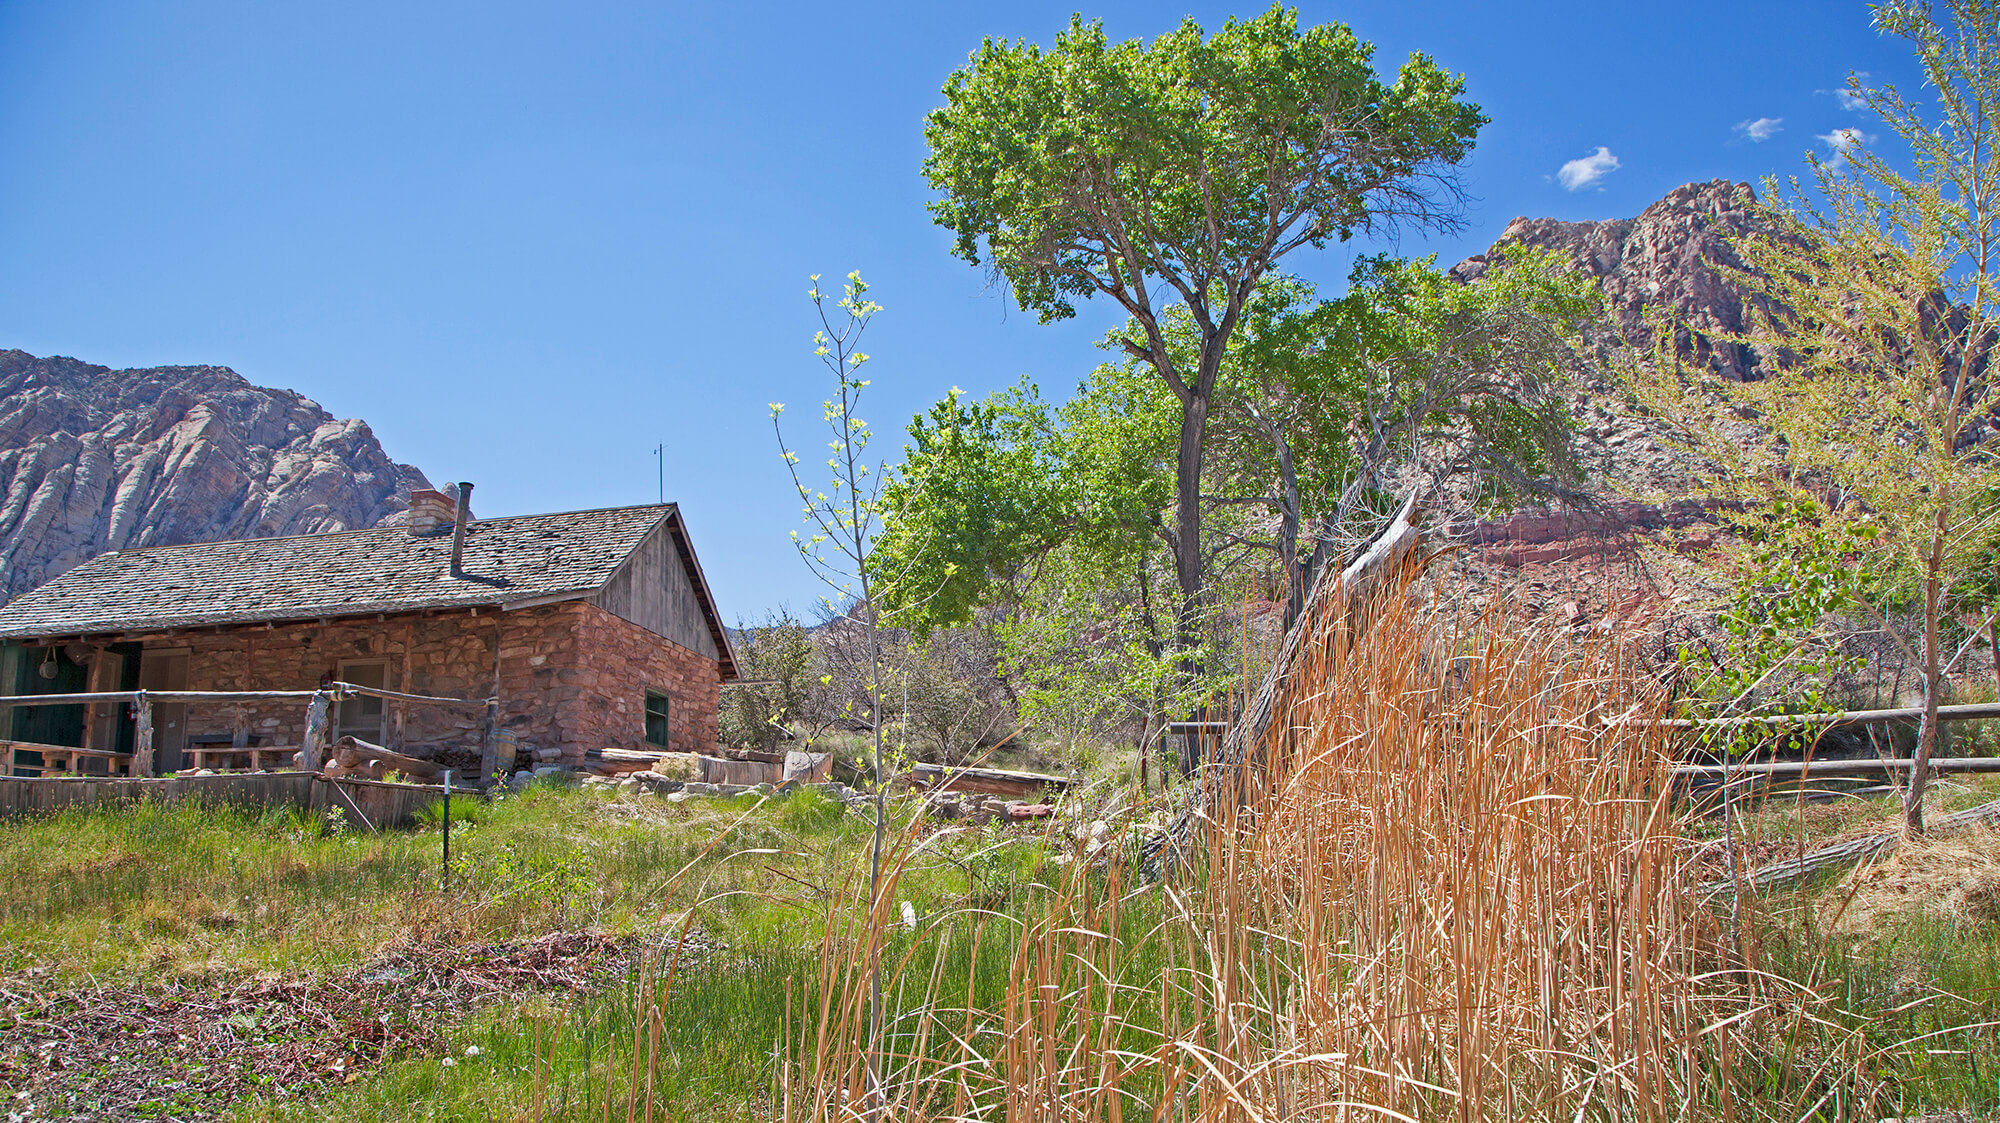 Spring Mountain Ranch State Park